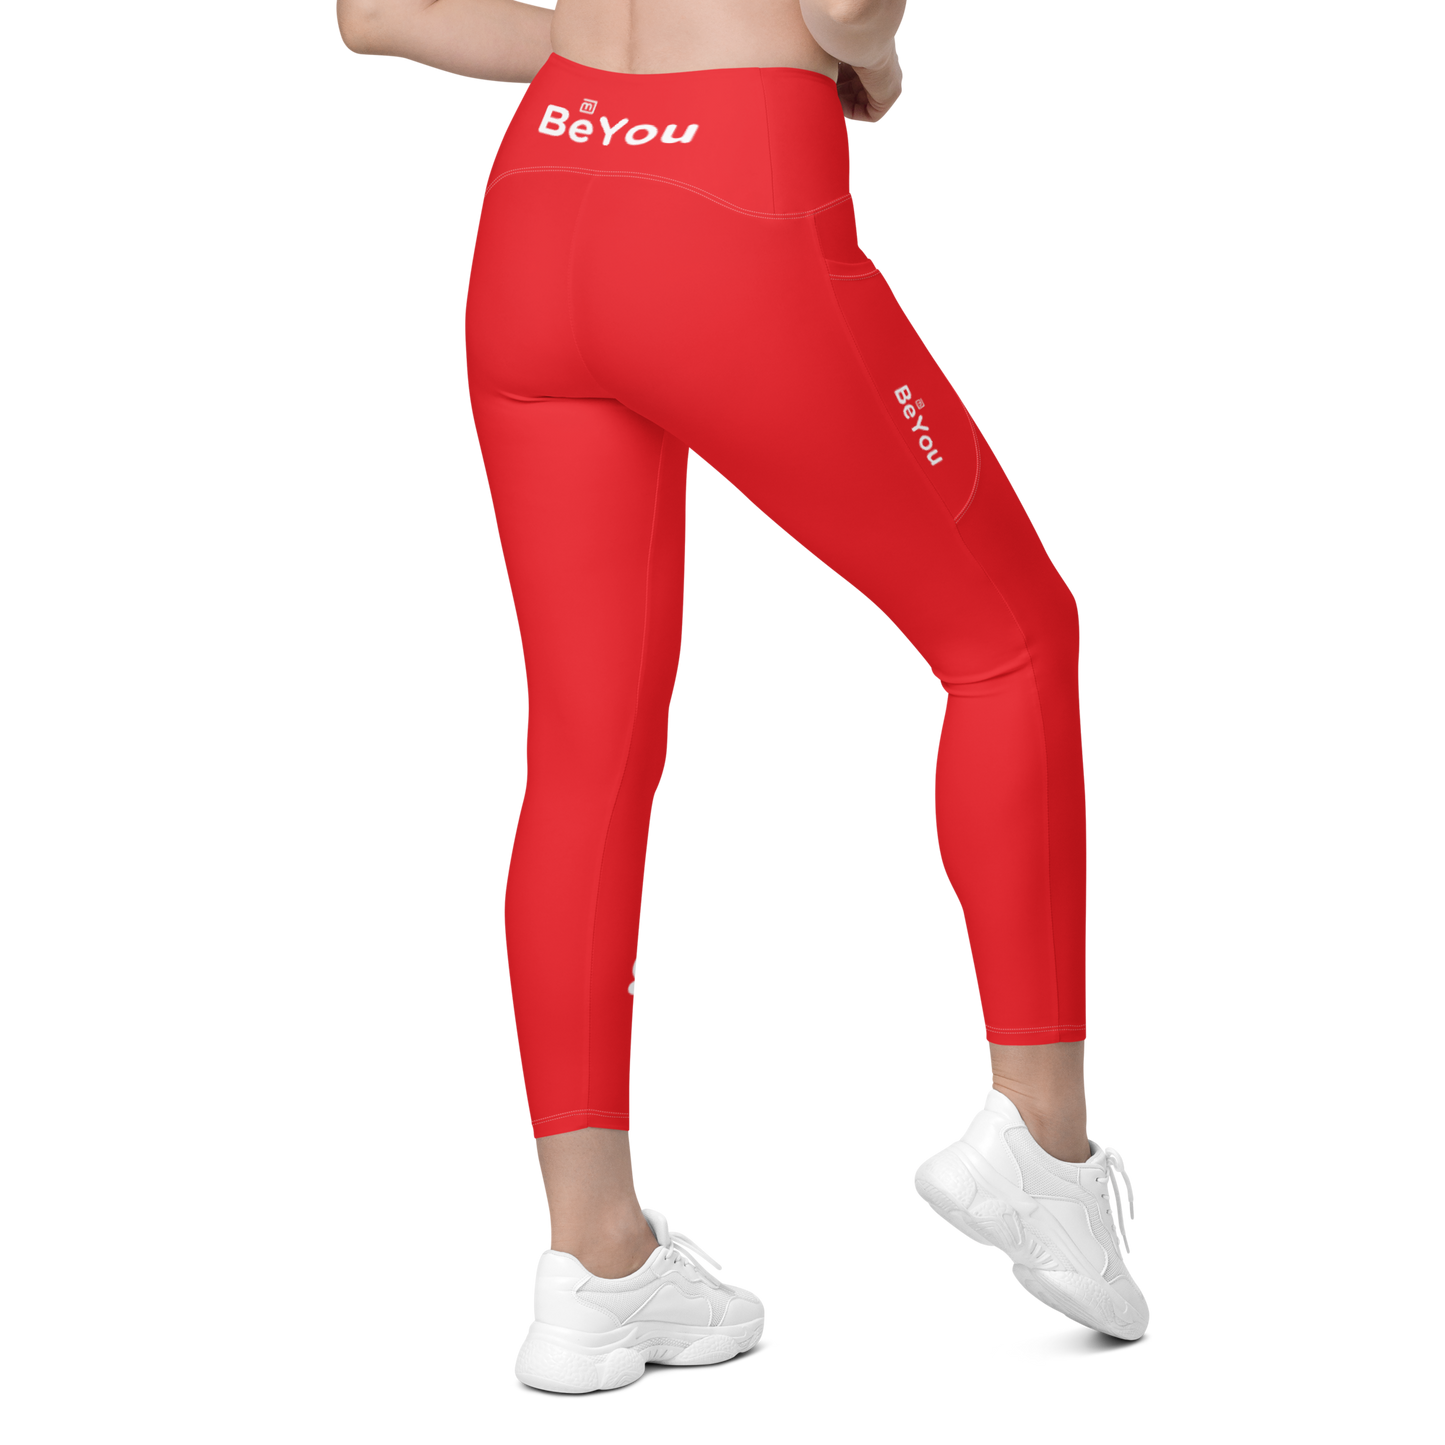 Alizarin Red Crossover Leggings with Pockets